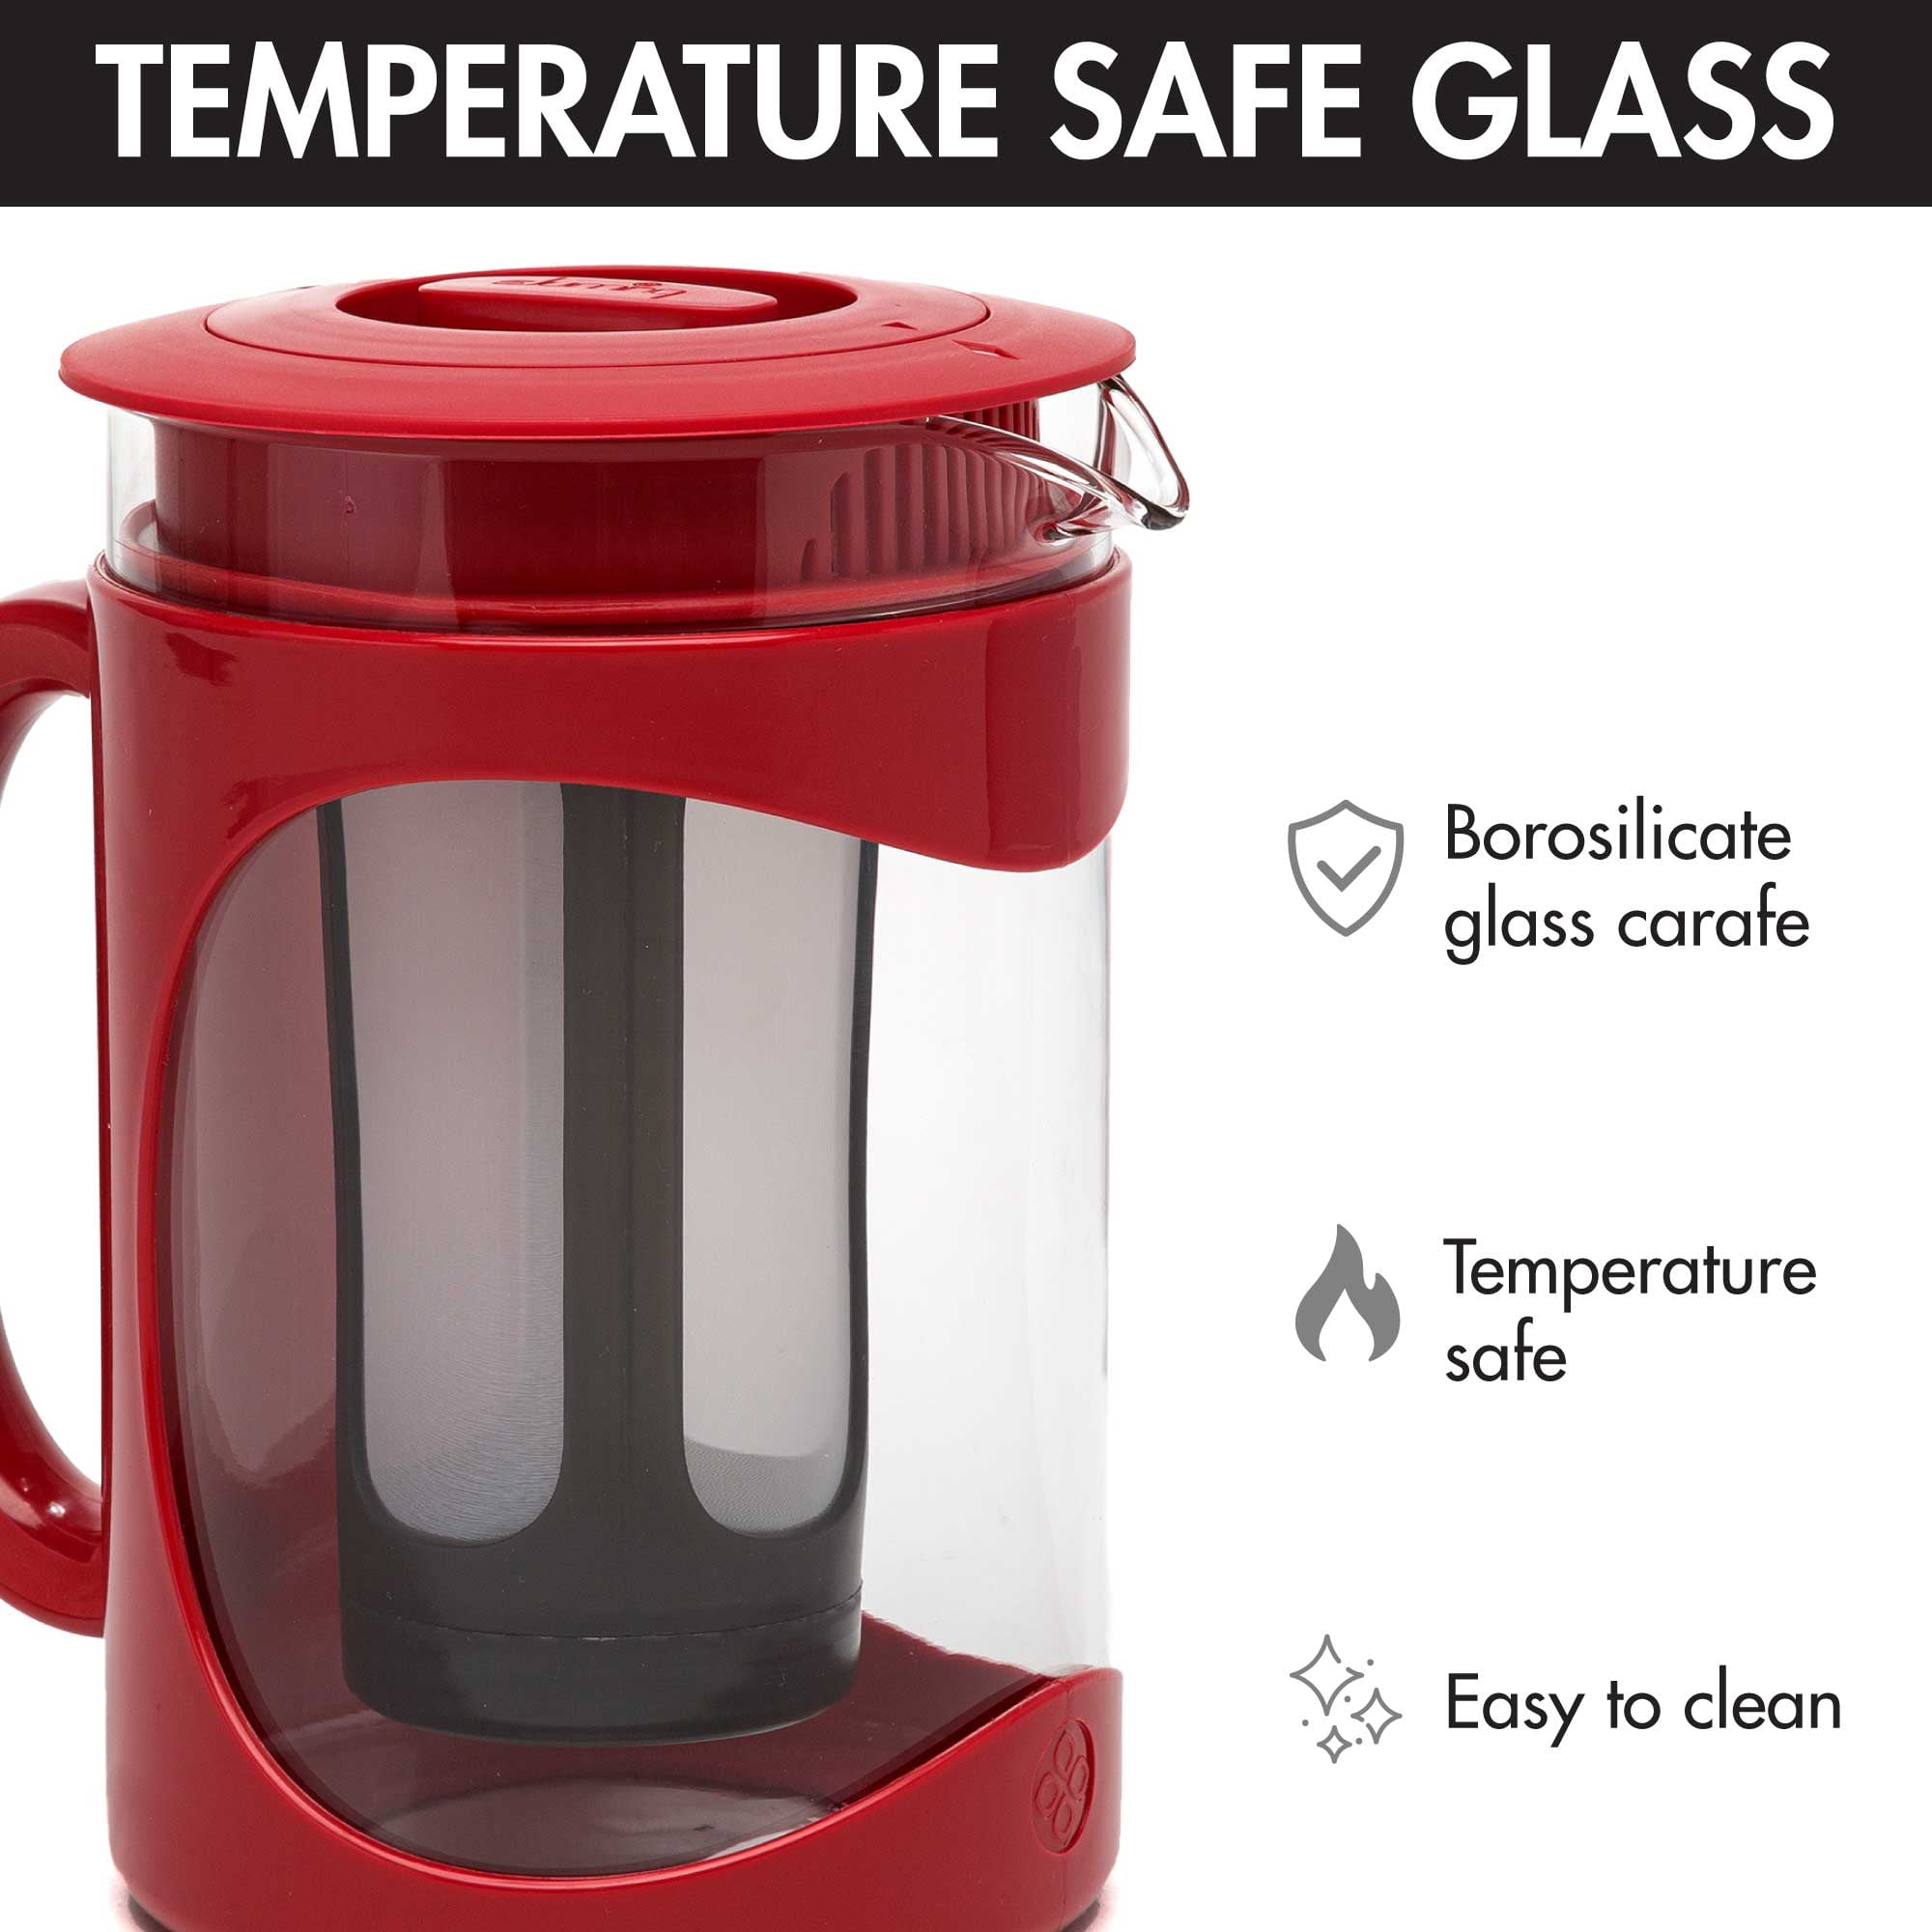  Primula Burke Deluxe Cold Brew Iced Coffee Maker, Comfort Grip  Handle, Durable Glass Carafe, Removable Mesh Filter, Perfect 6 Cup Size,  Dishwasher Safe, 1.6 qt, Aqua: Home & Kitchen